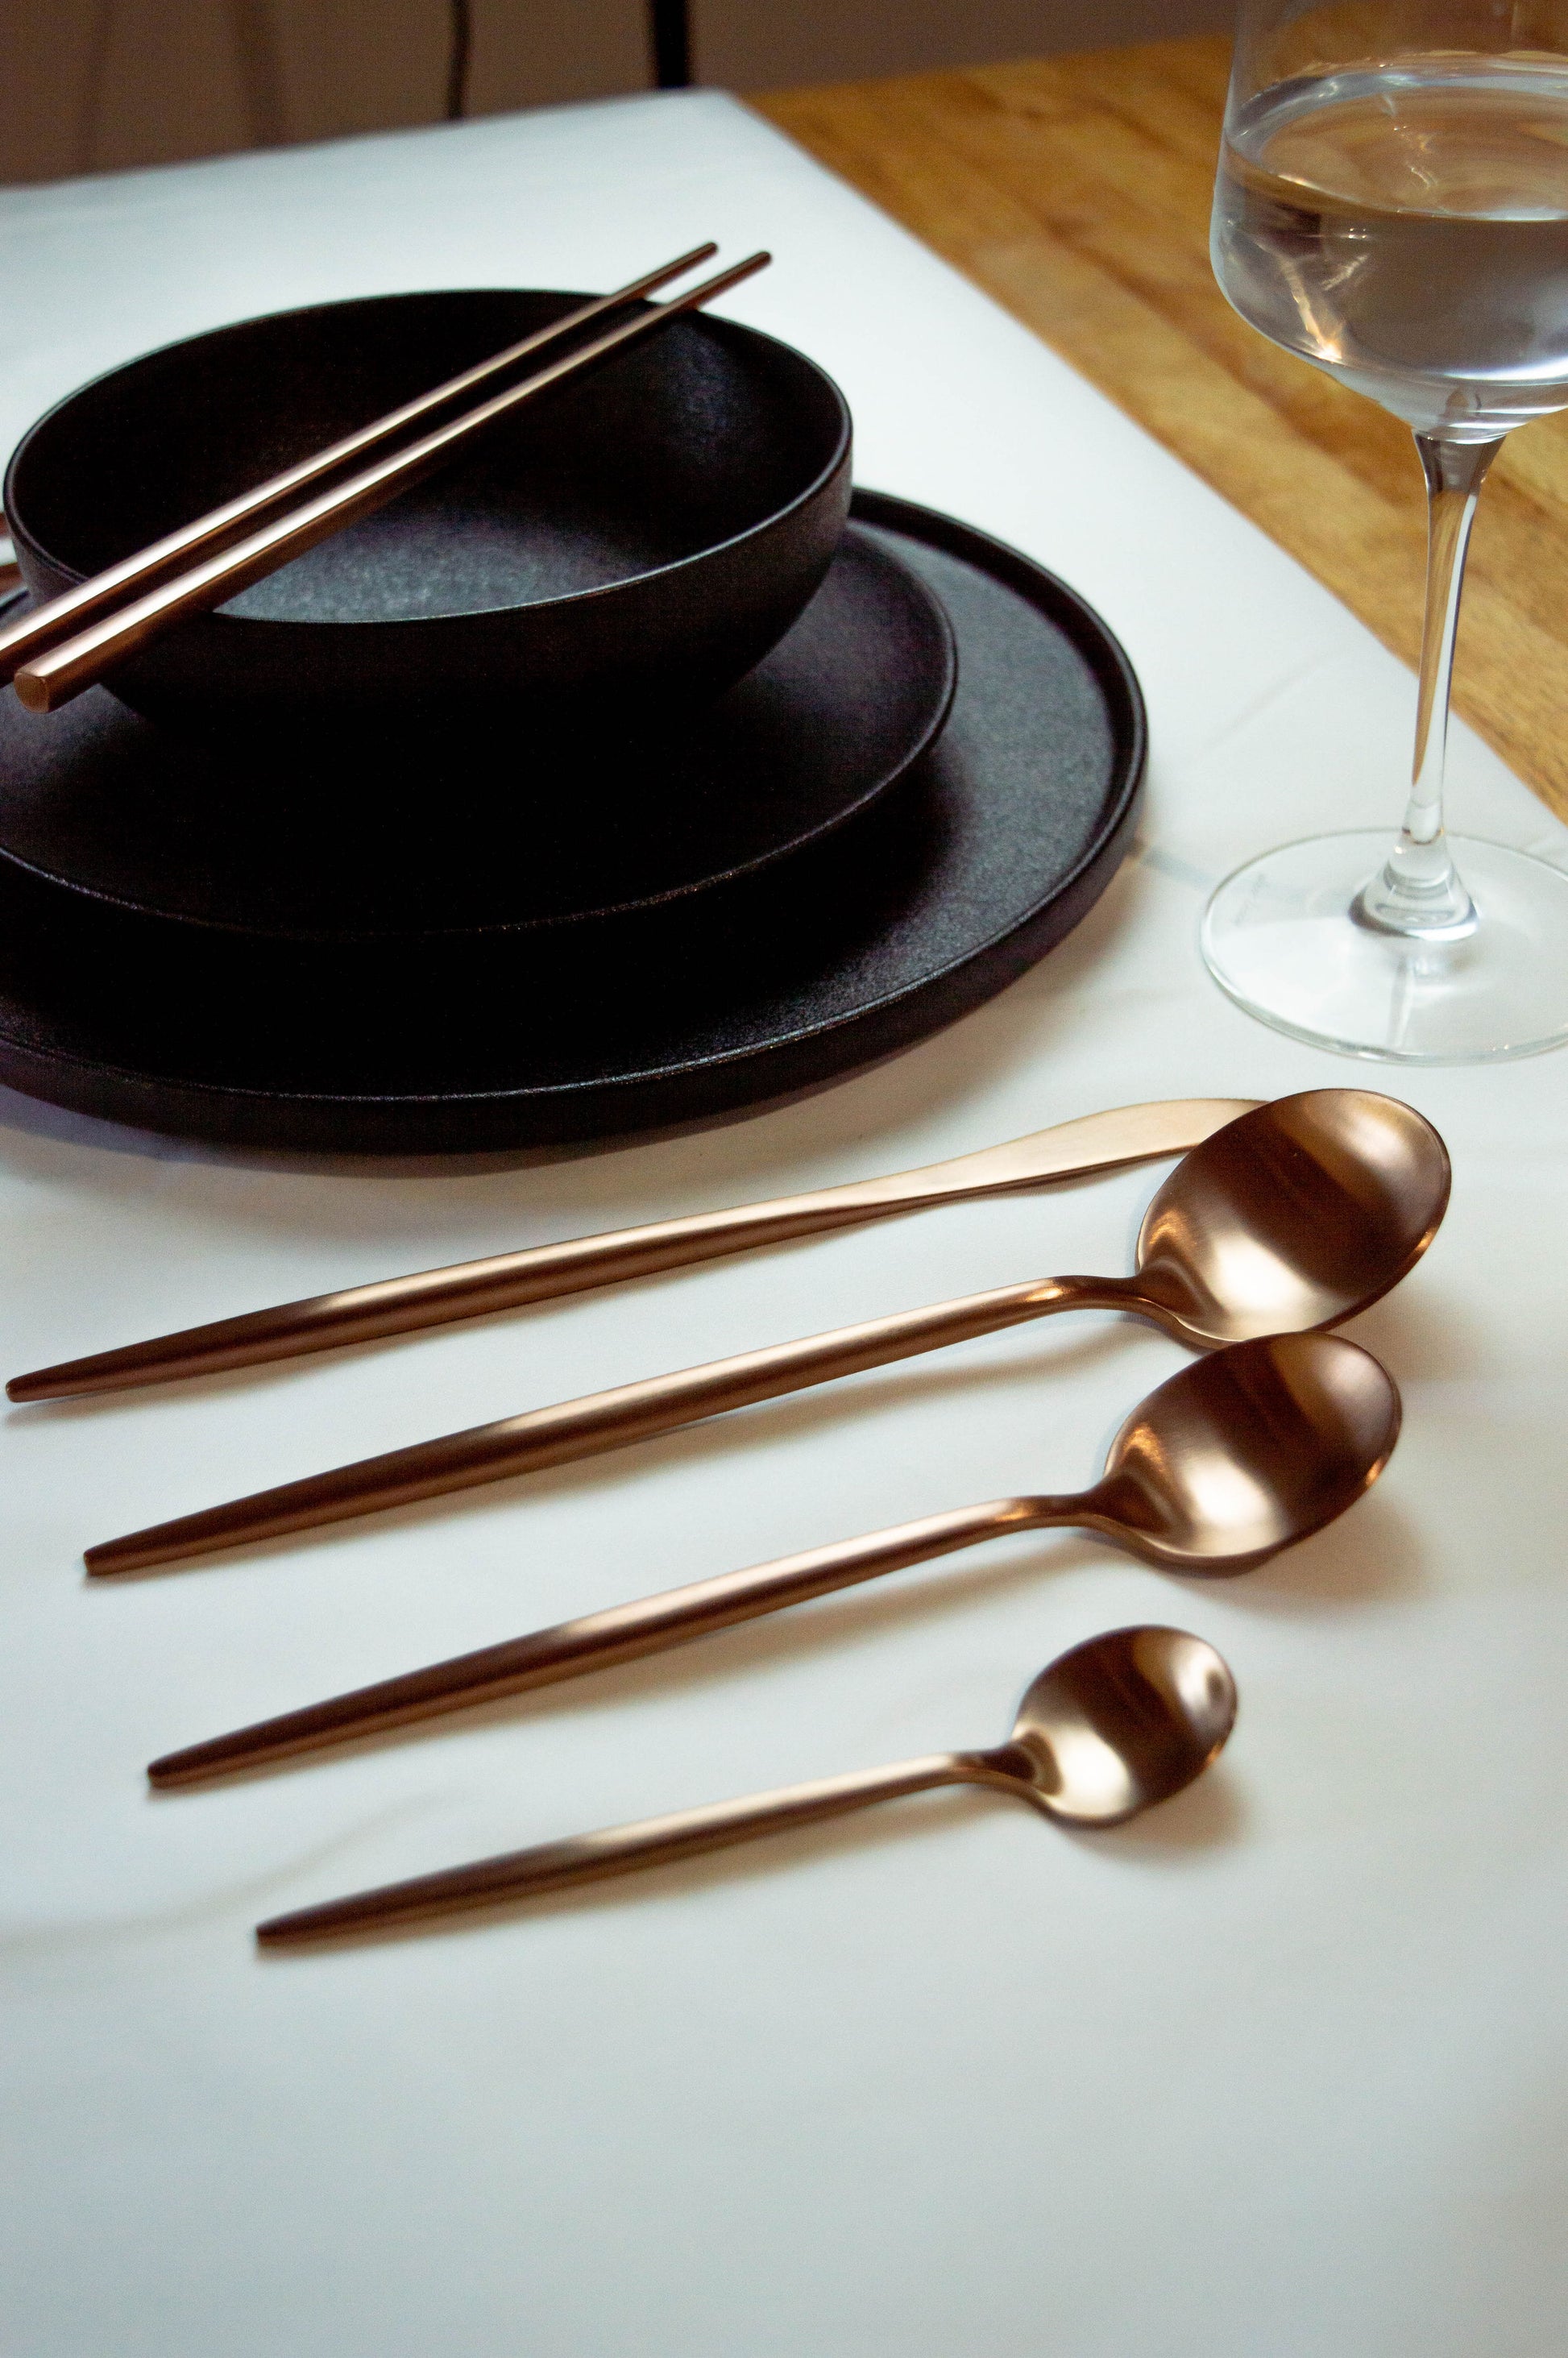 gold silverware set chopsticks reusable cutlery set lightning deals  wedding registry search anniversary at home home party juego de cubiertos couples gift gold cutlery set gold spoons and forks set house warming gift kitchen gifts chopstick eating utensils sets dining table decor and accessories